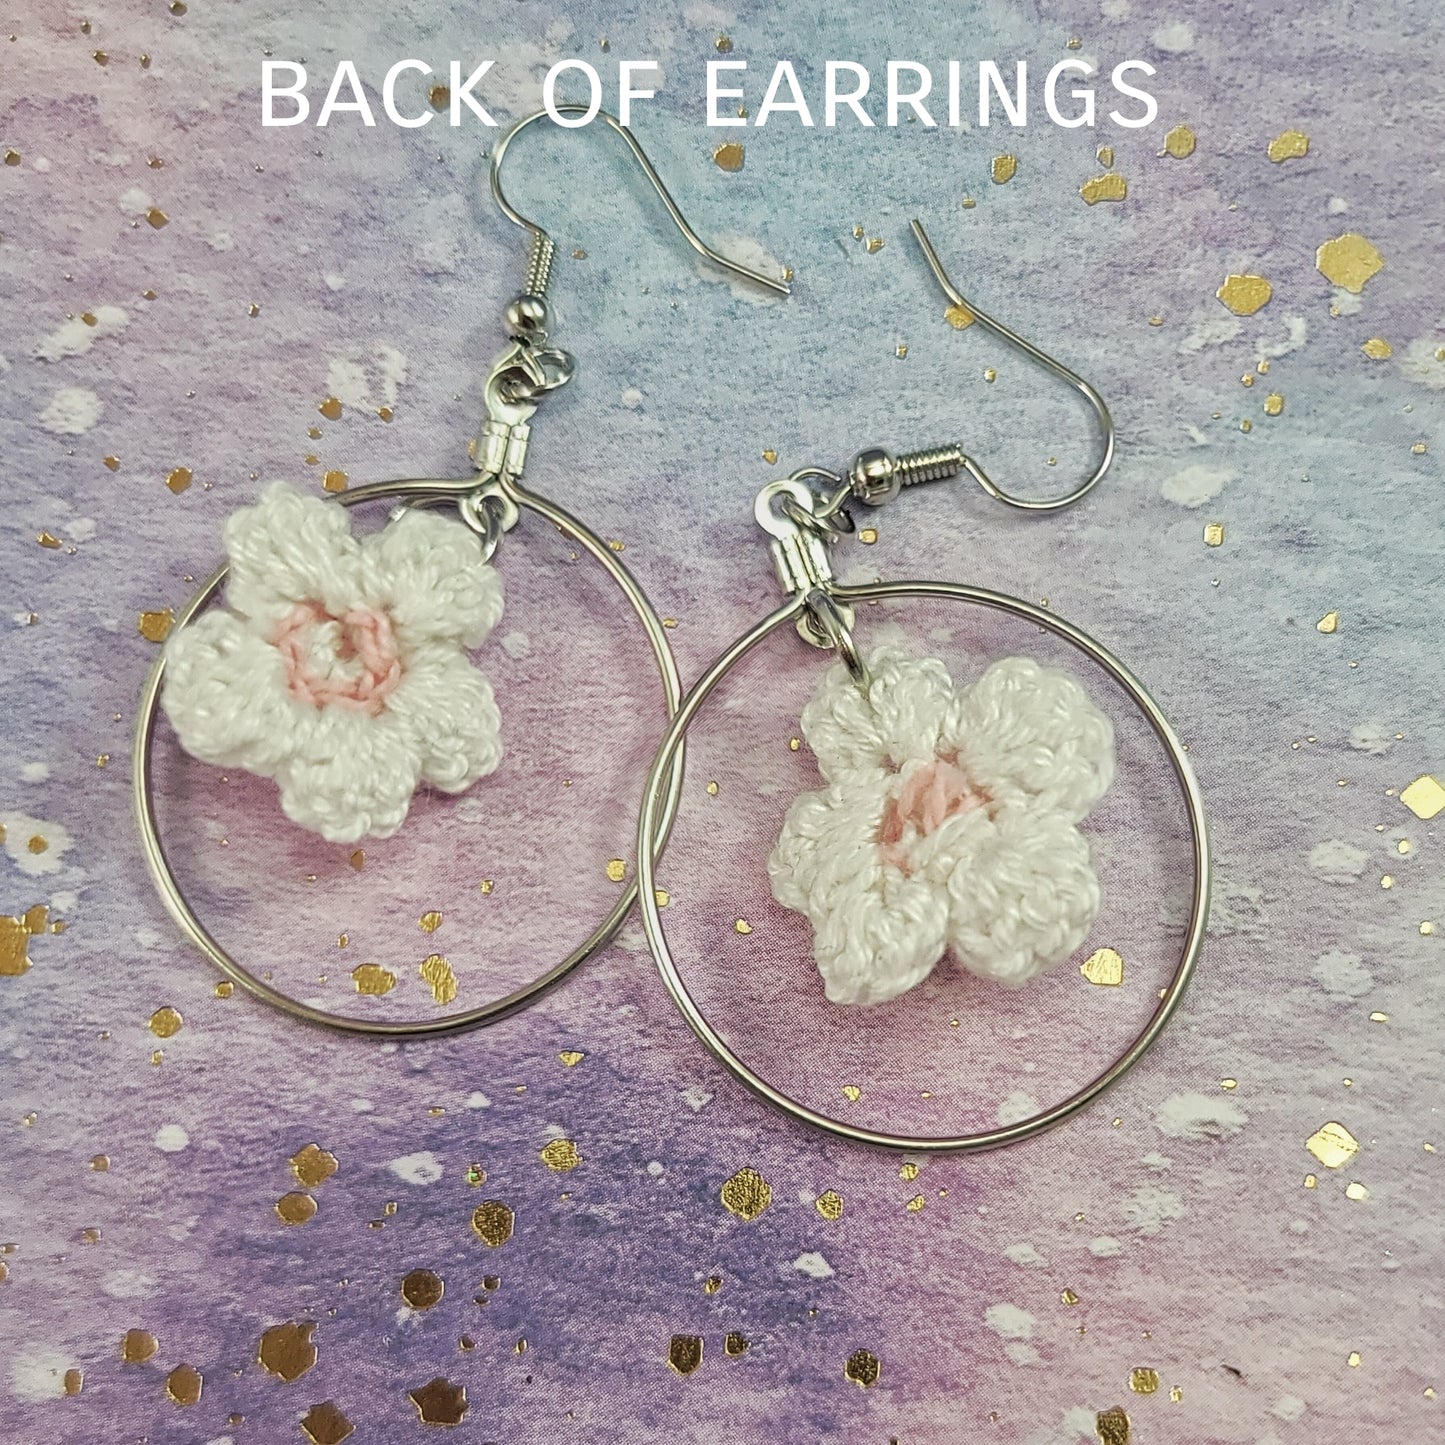 Crochet Cherry Blossom Hand Crafted Earrings.